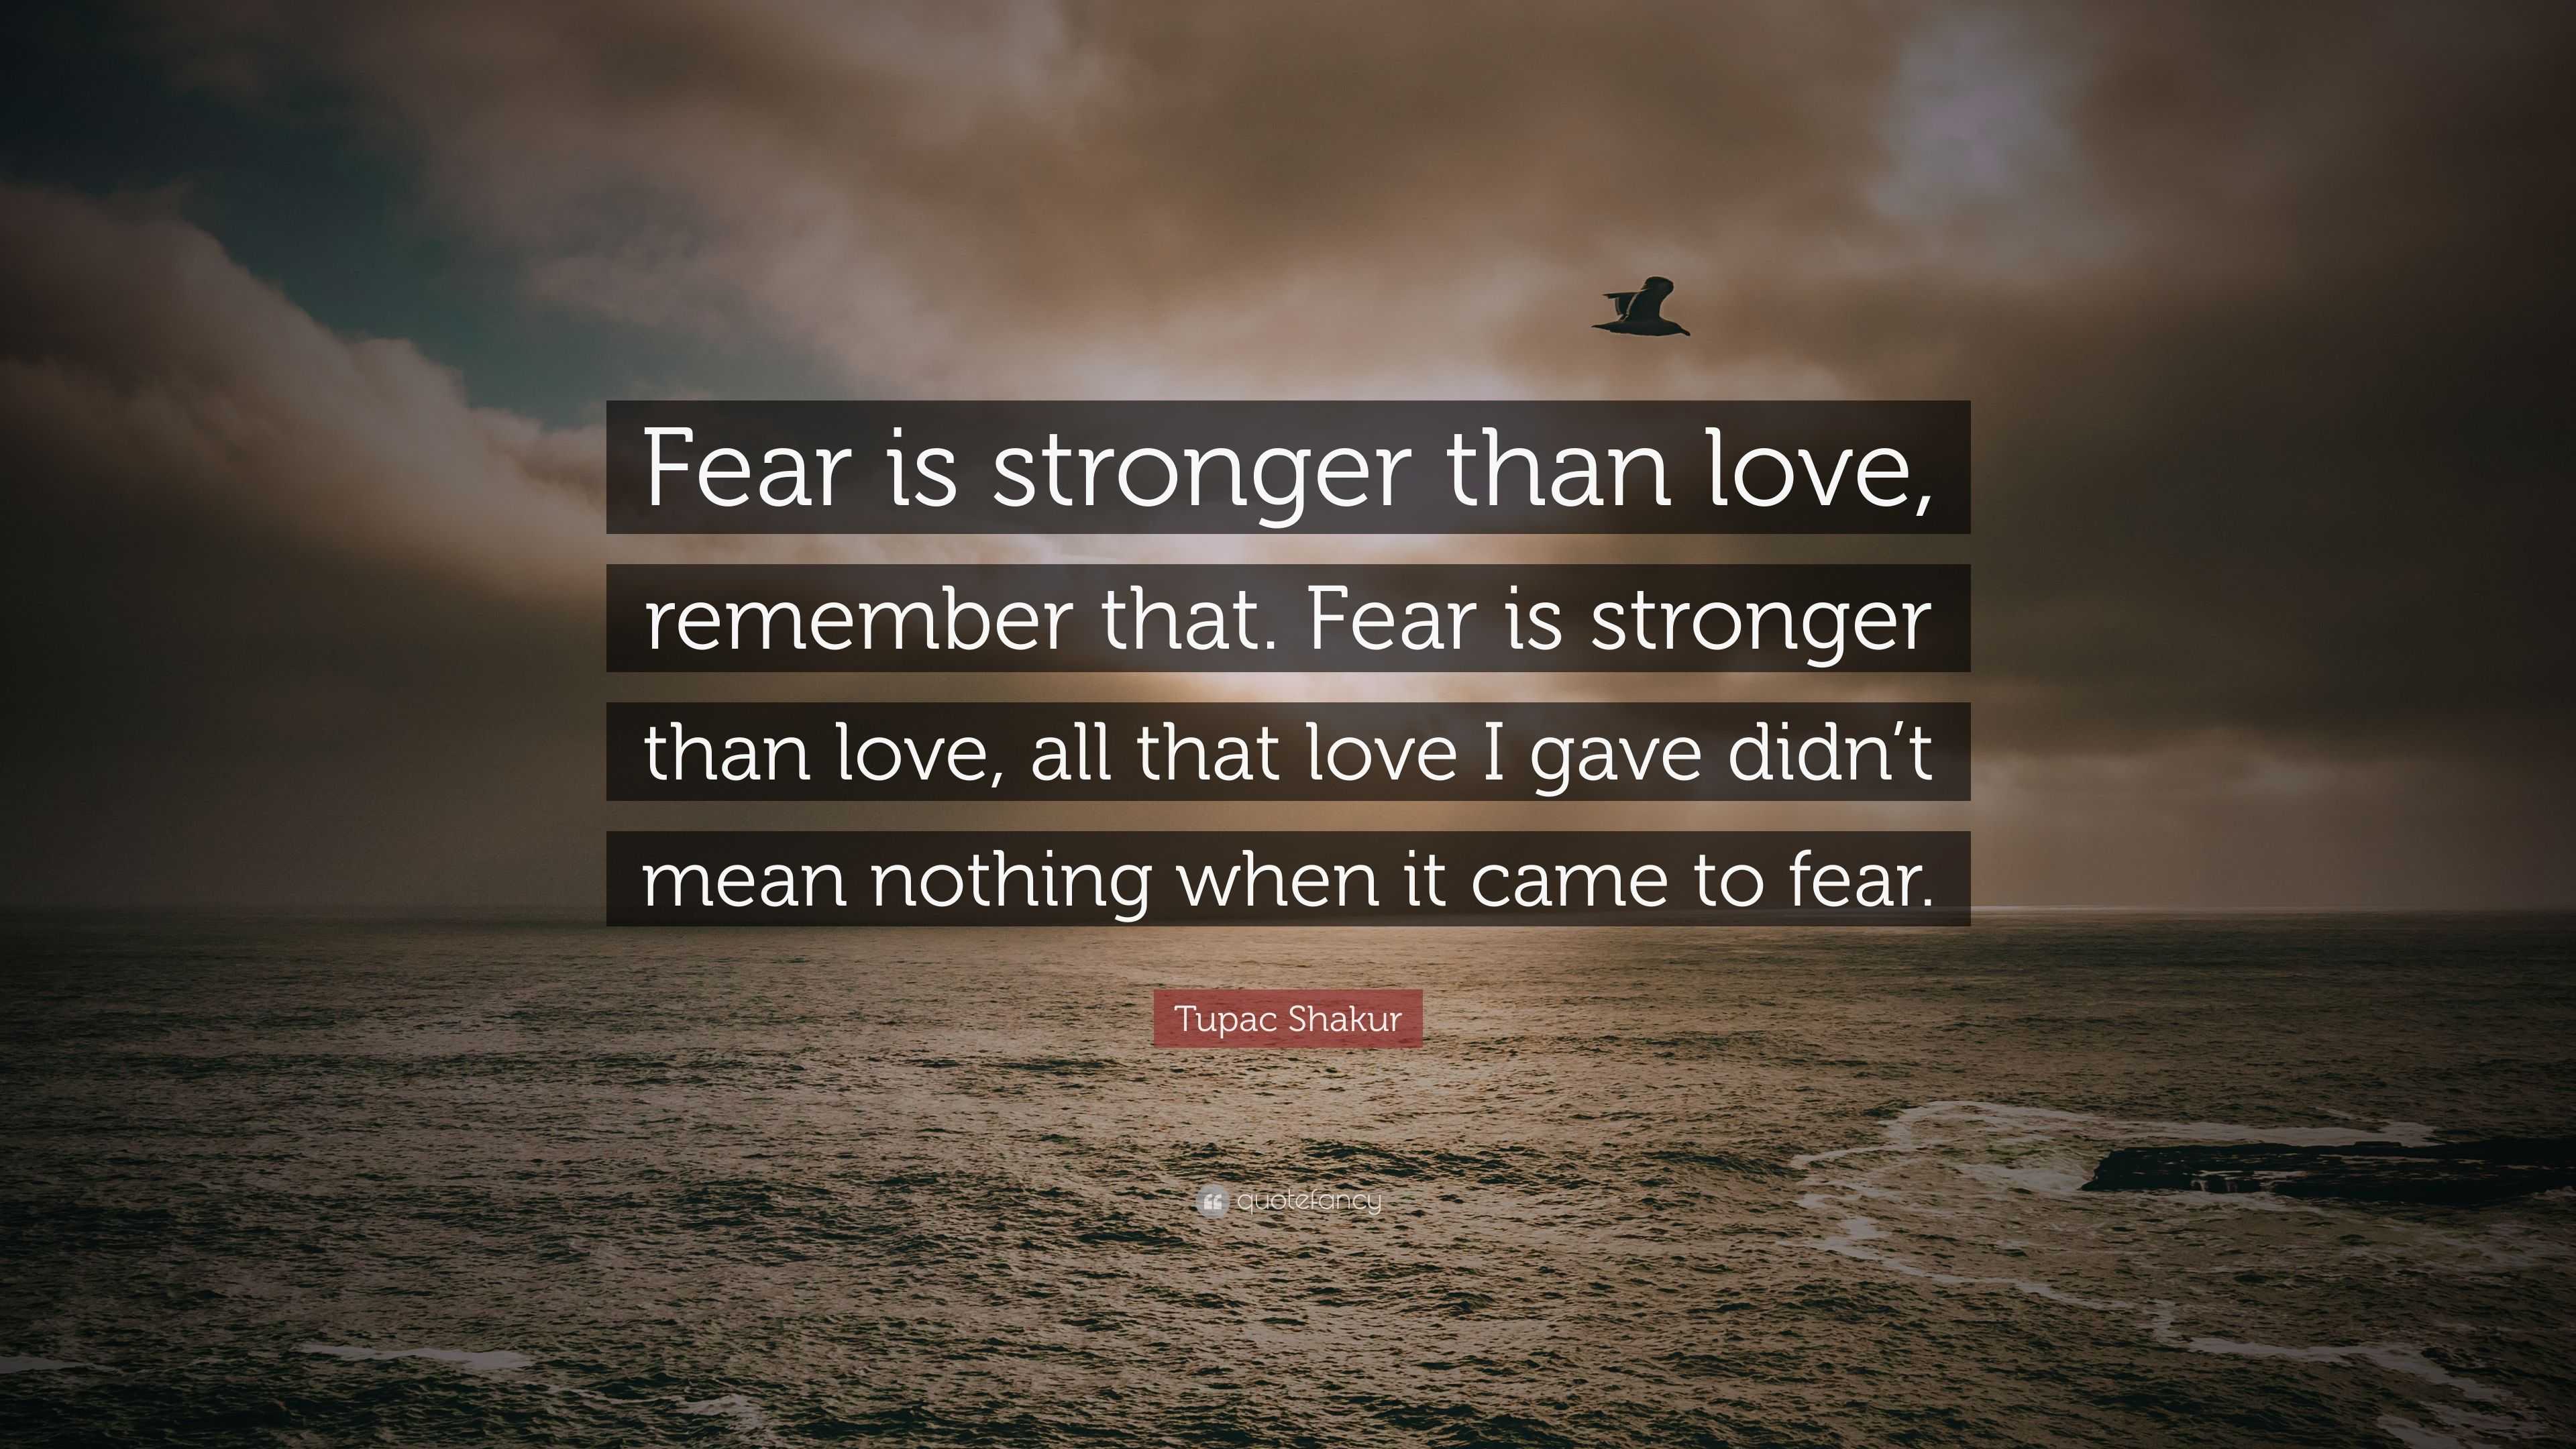 Tupac Shakur Quote: “Fear is stronger than love, remember that. Fear is